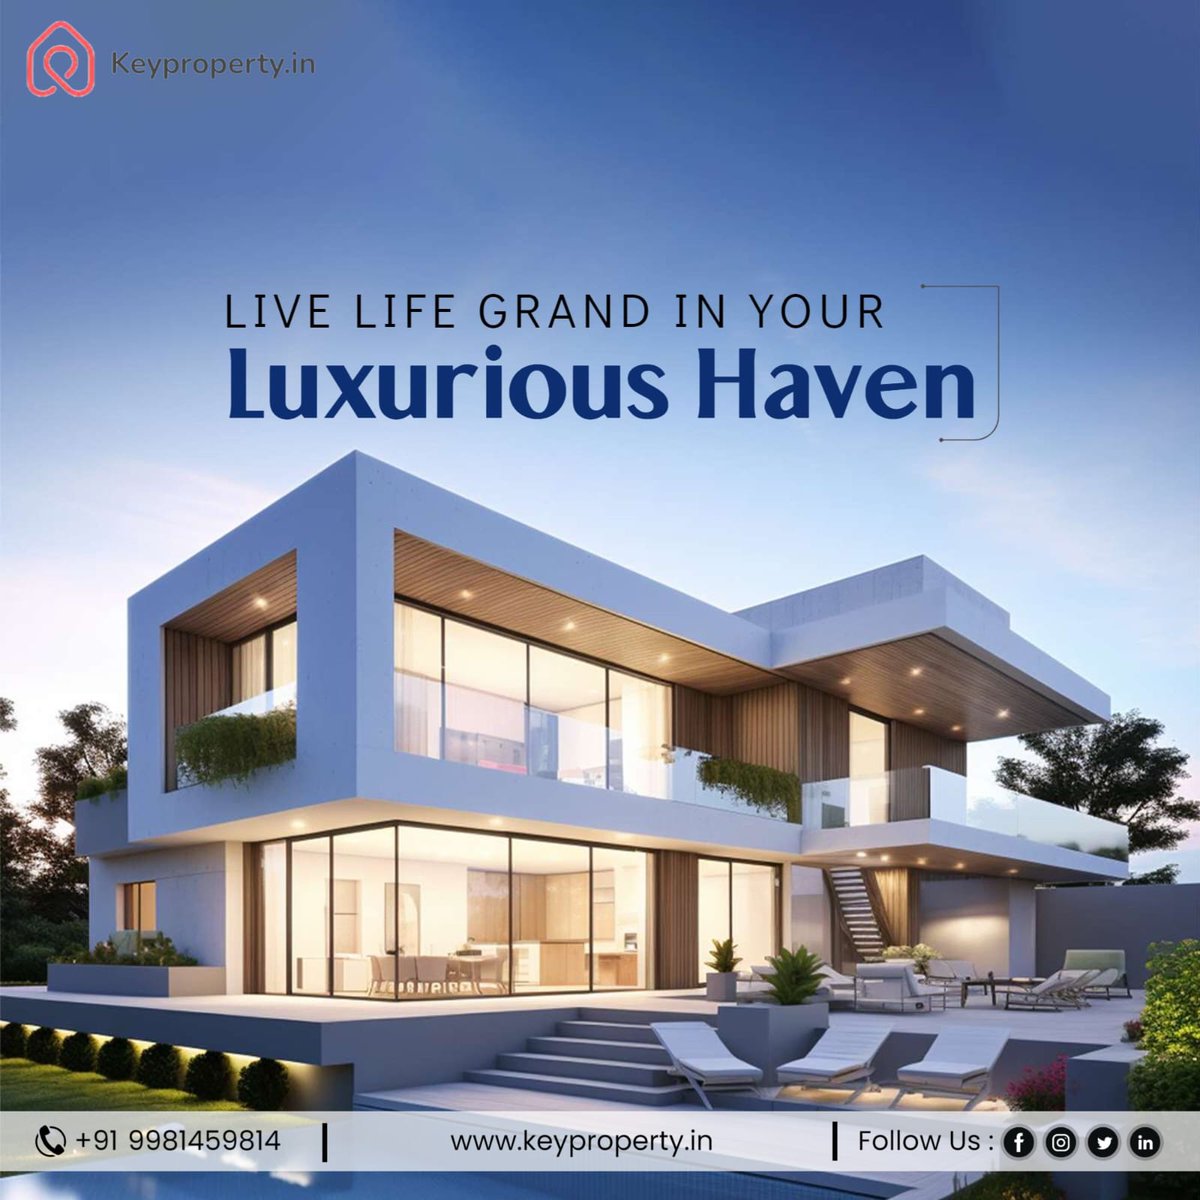 Live Life Grand in Your Luxurious Haven - Keyproperty
Visit Now - https://www.keyproperty/
WhatsApp Now - 9981459814
.
.
#RealEstate #PropertyForSale #DreamHome
#InvestmentOpportunity #LuxuryLiving #HomeBuyers
#HouseHunting #PrimeLocation #ModernLiving #YourDreamHome